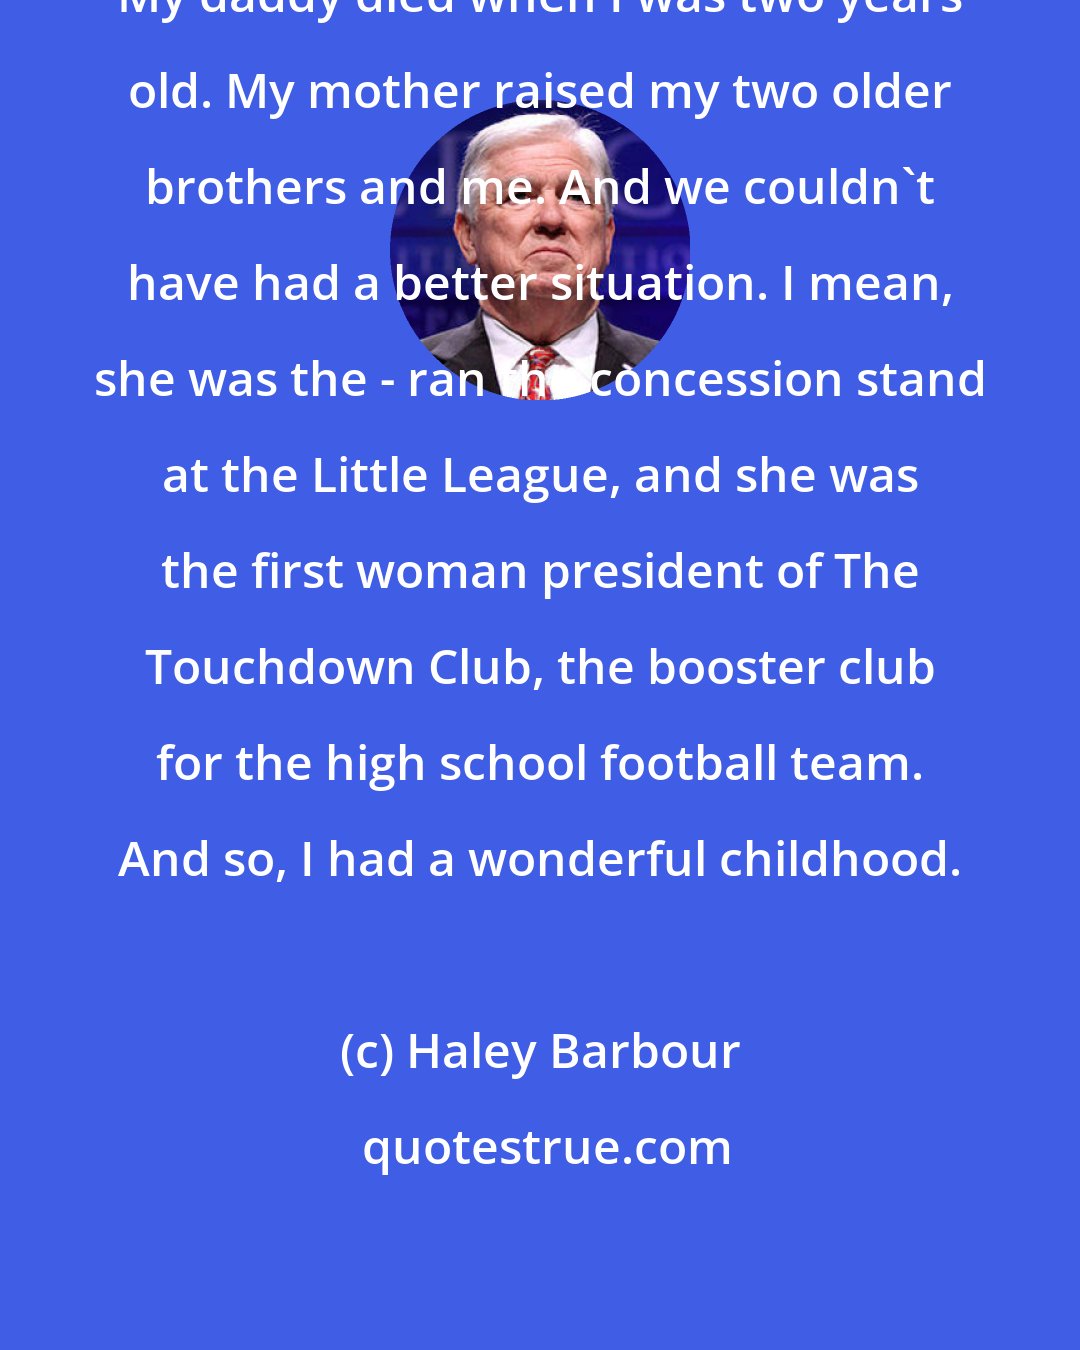 Haley Barbour: My daddy died when I was two years old. My mother raised my two older brothers and me. And we couldn't have had a better situation. I mean, she was the - ran the concession stand at the Little League, and she was the first woman president of The Touchdown Club, the booster club for the high school football team. And so, I had a wonderful childhood.